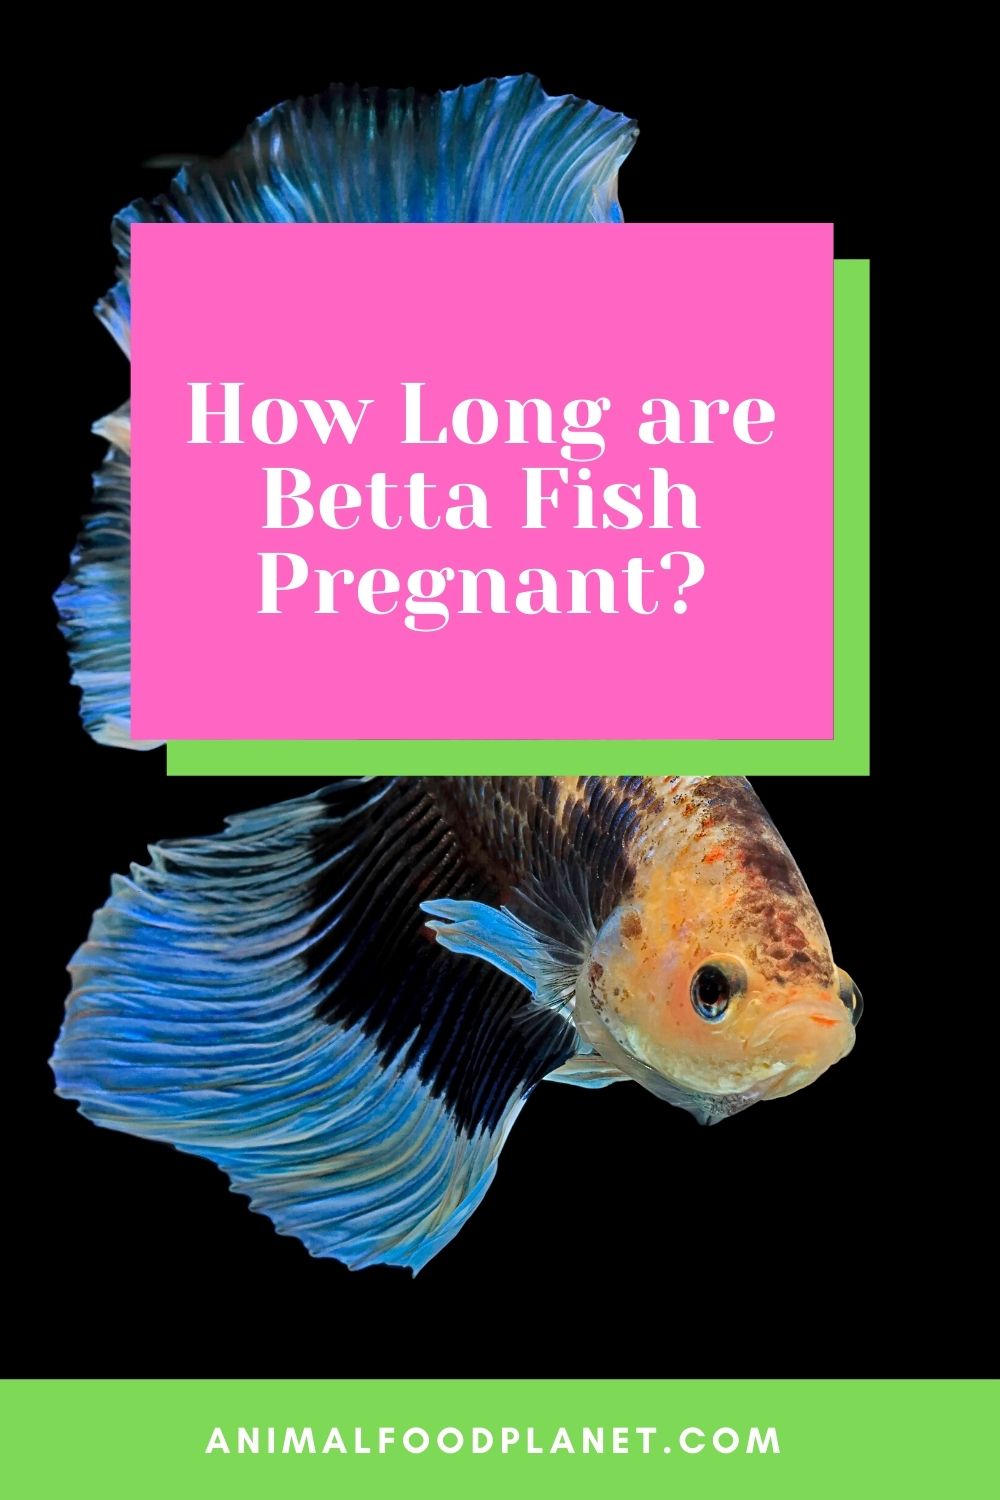 How Long Are Betta Fish Pregnant?